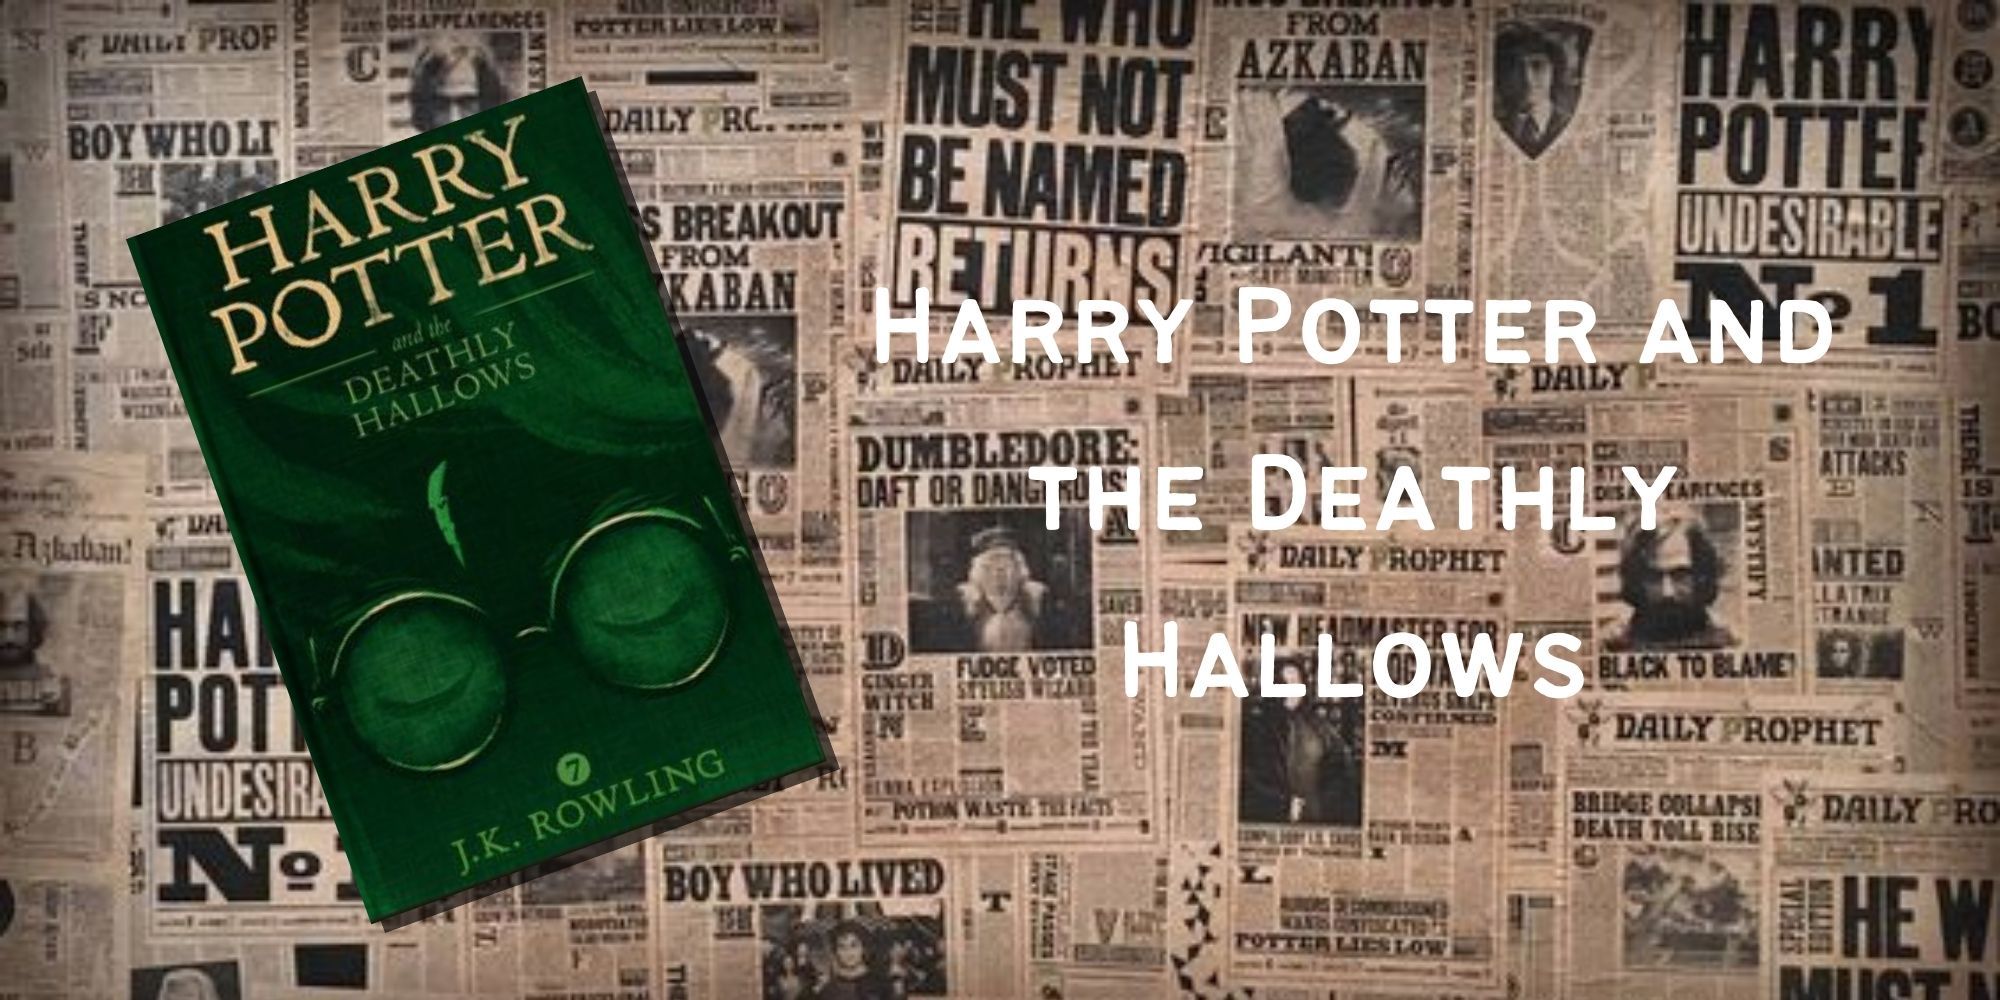 The cover of Harry Potter and the Deathly Hallows